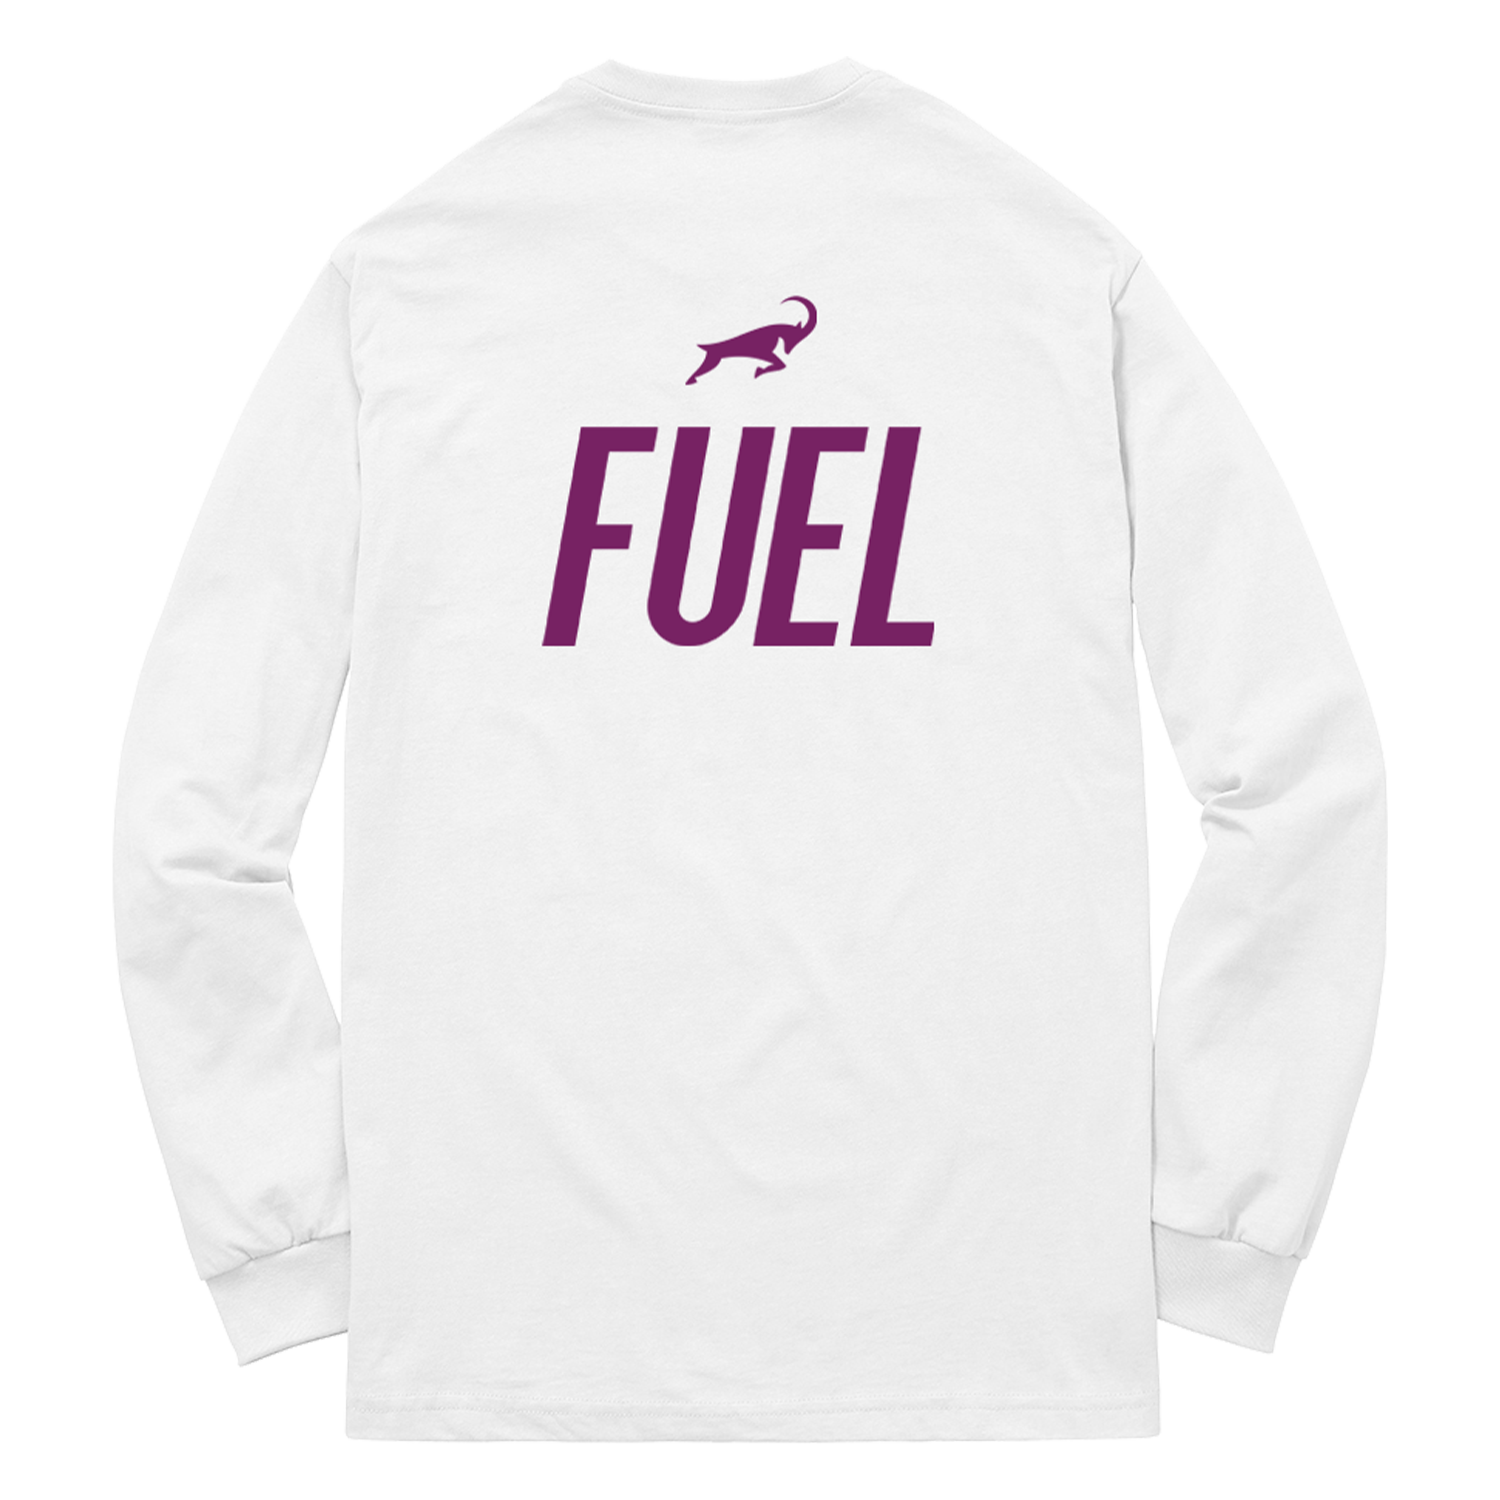 G.O.A.T. FUEL LABEL WHITE LONG SLEEVE